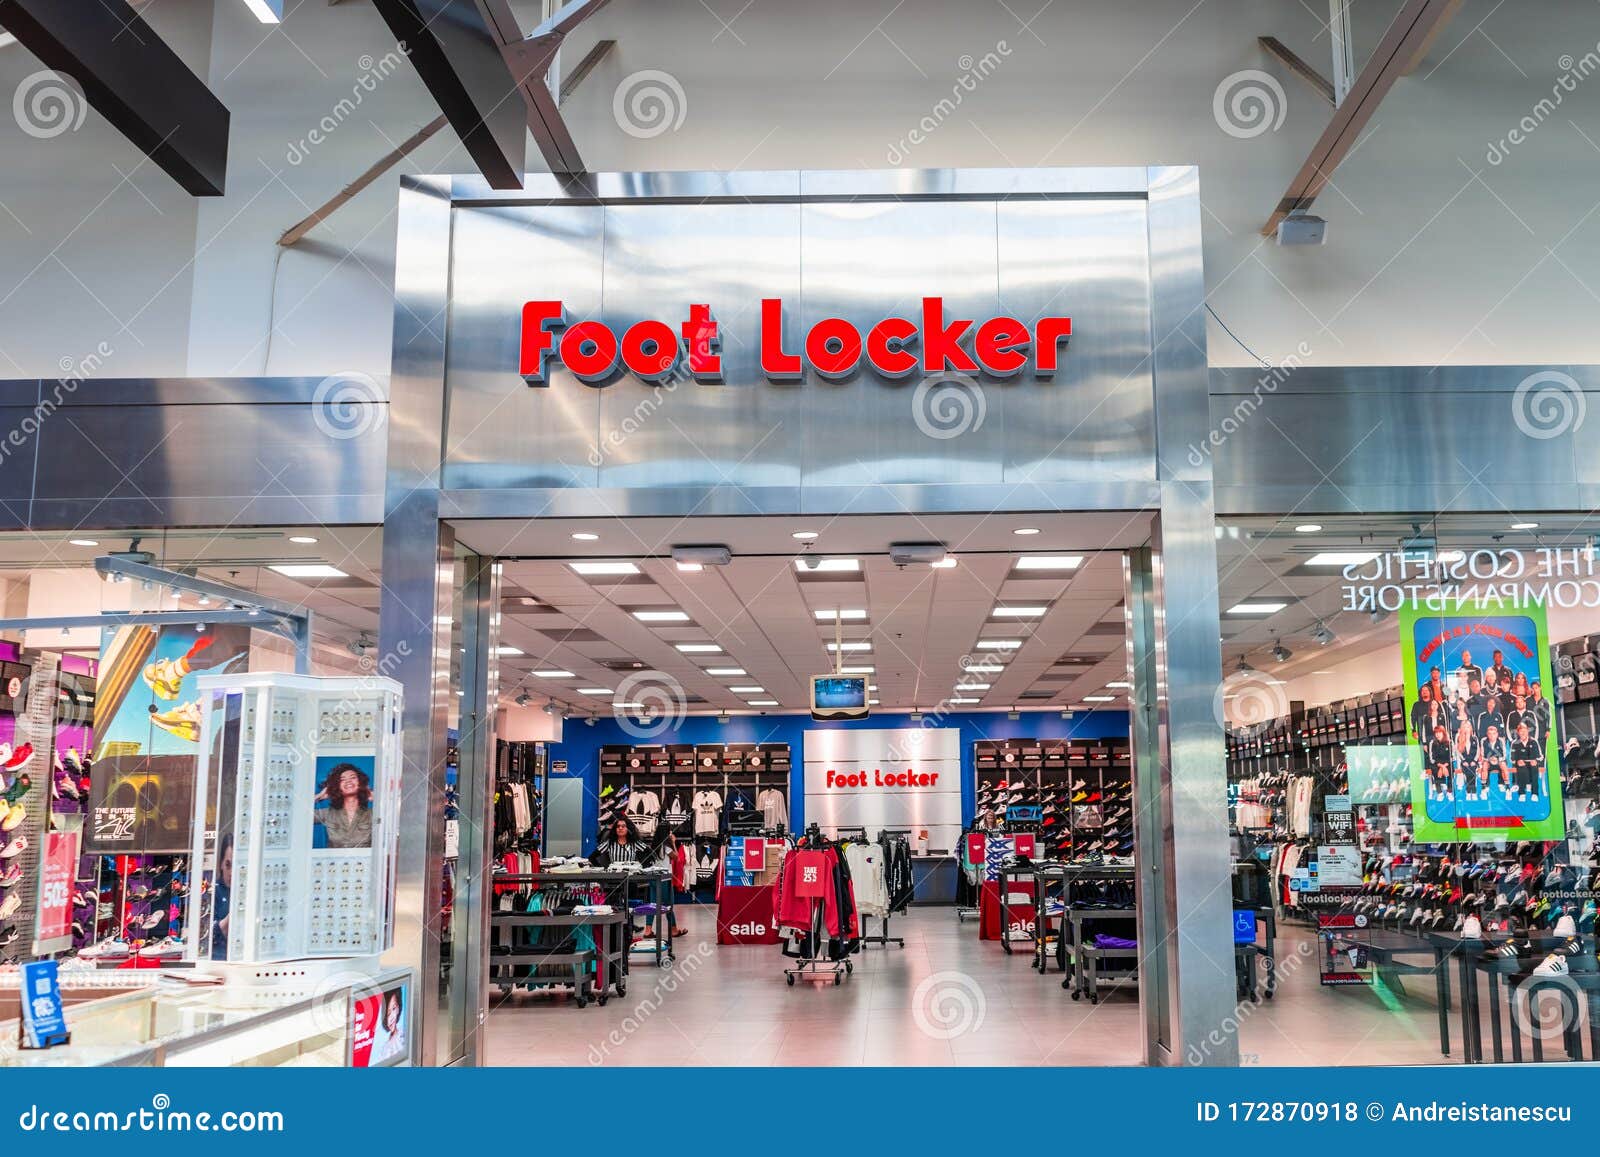 Jan 31, 2020 Milpitas / CA / USA - Foot Locker Store in a Shopping Mall ...